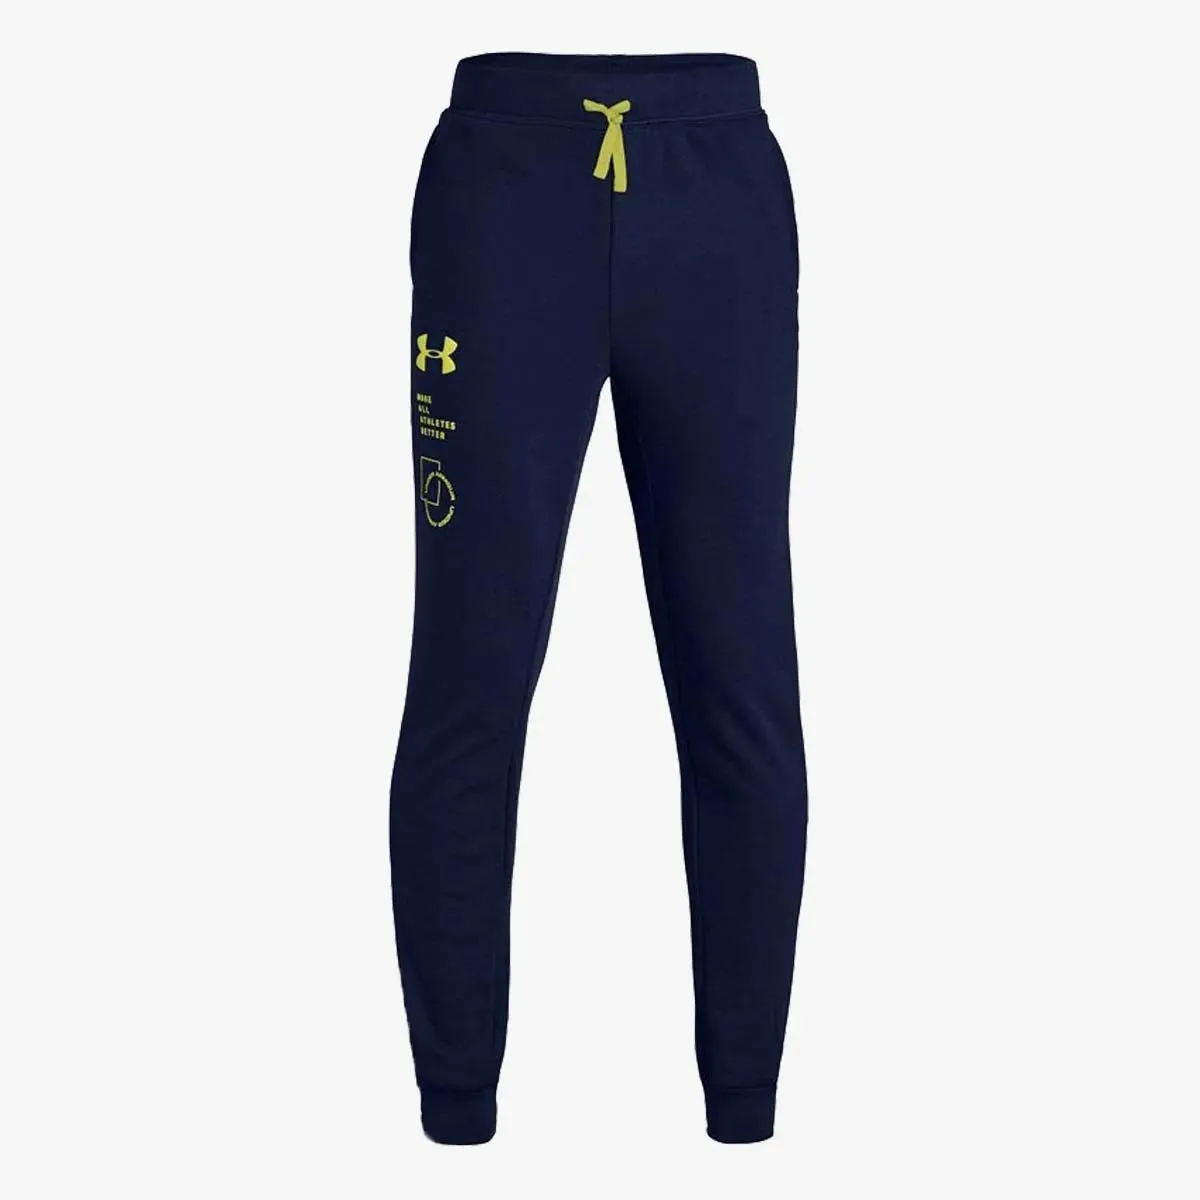 Under Armour Hlače Rival Terry Pant 